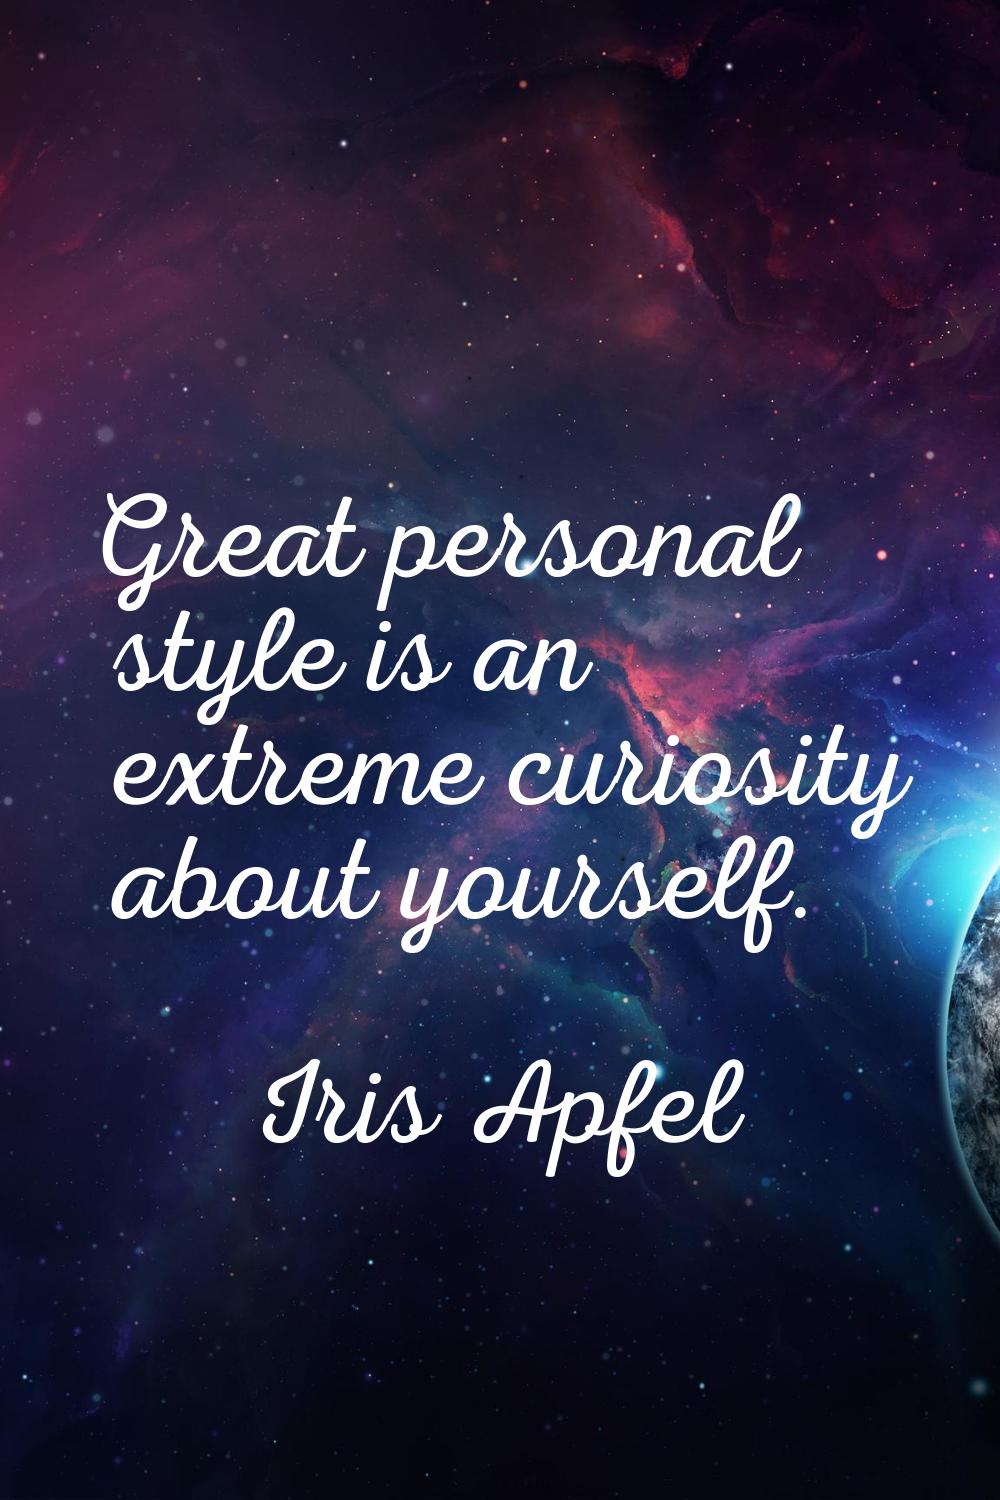 Great personal style is an extreme curiosity about yourself.